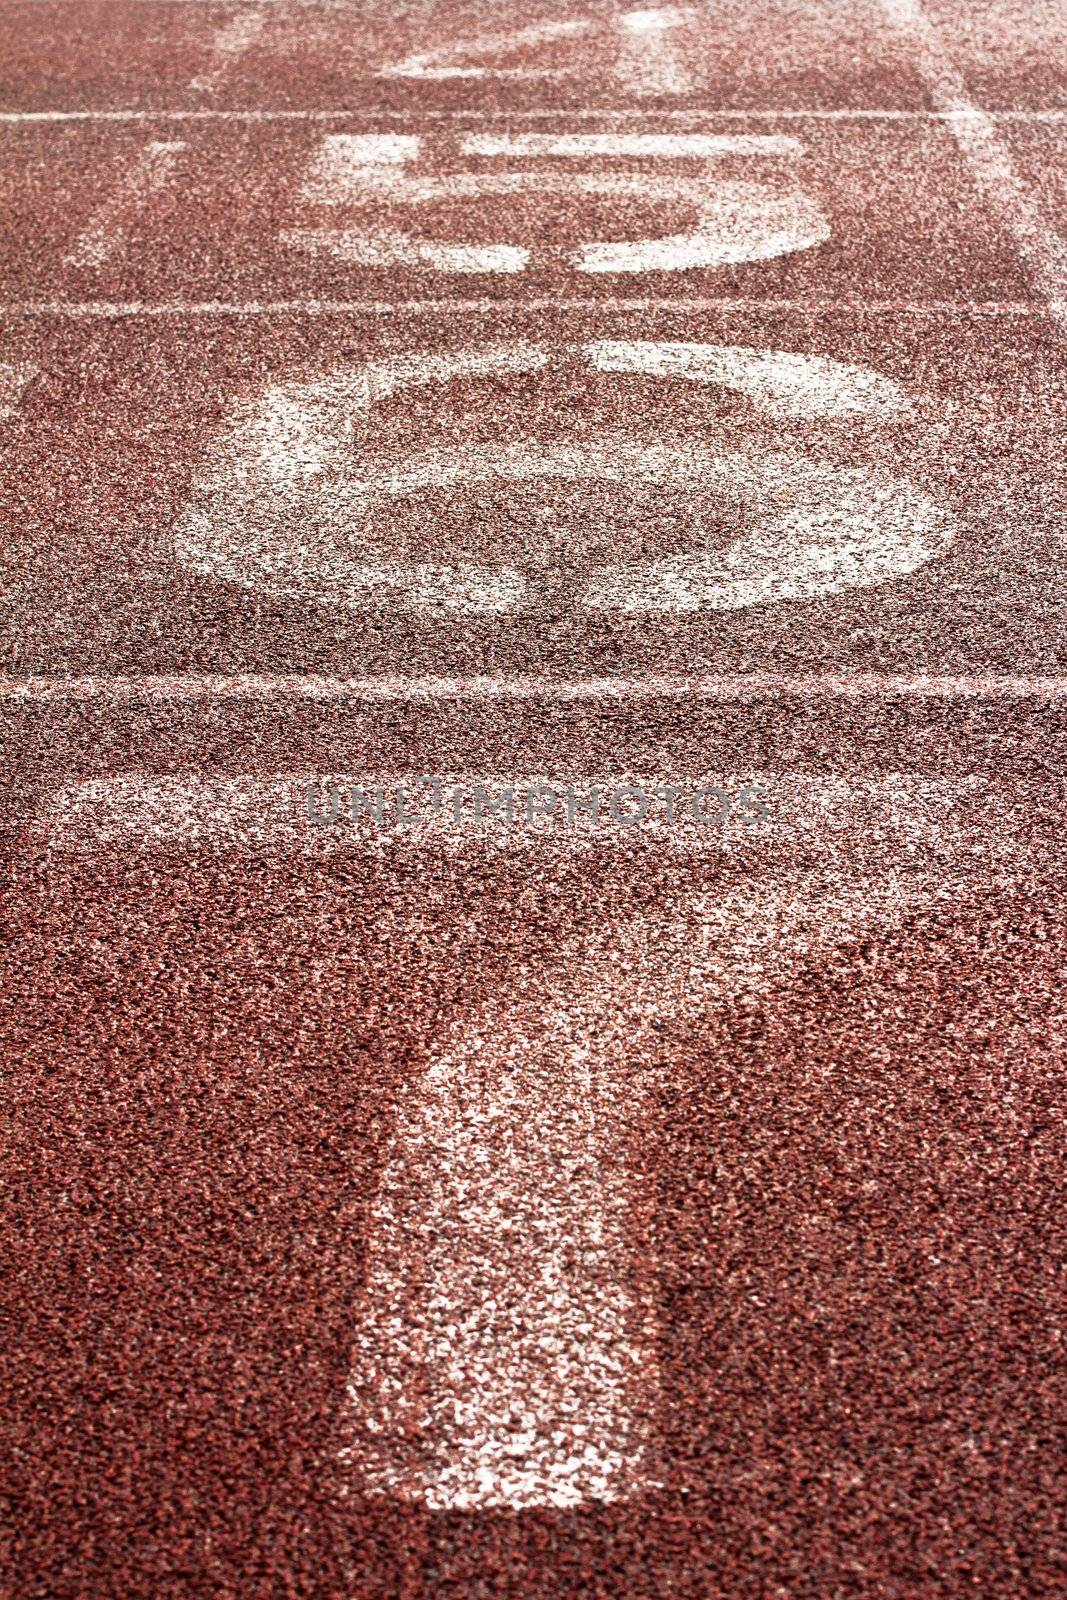 number on a running track